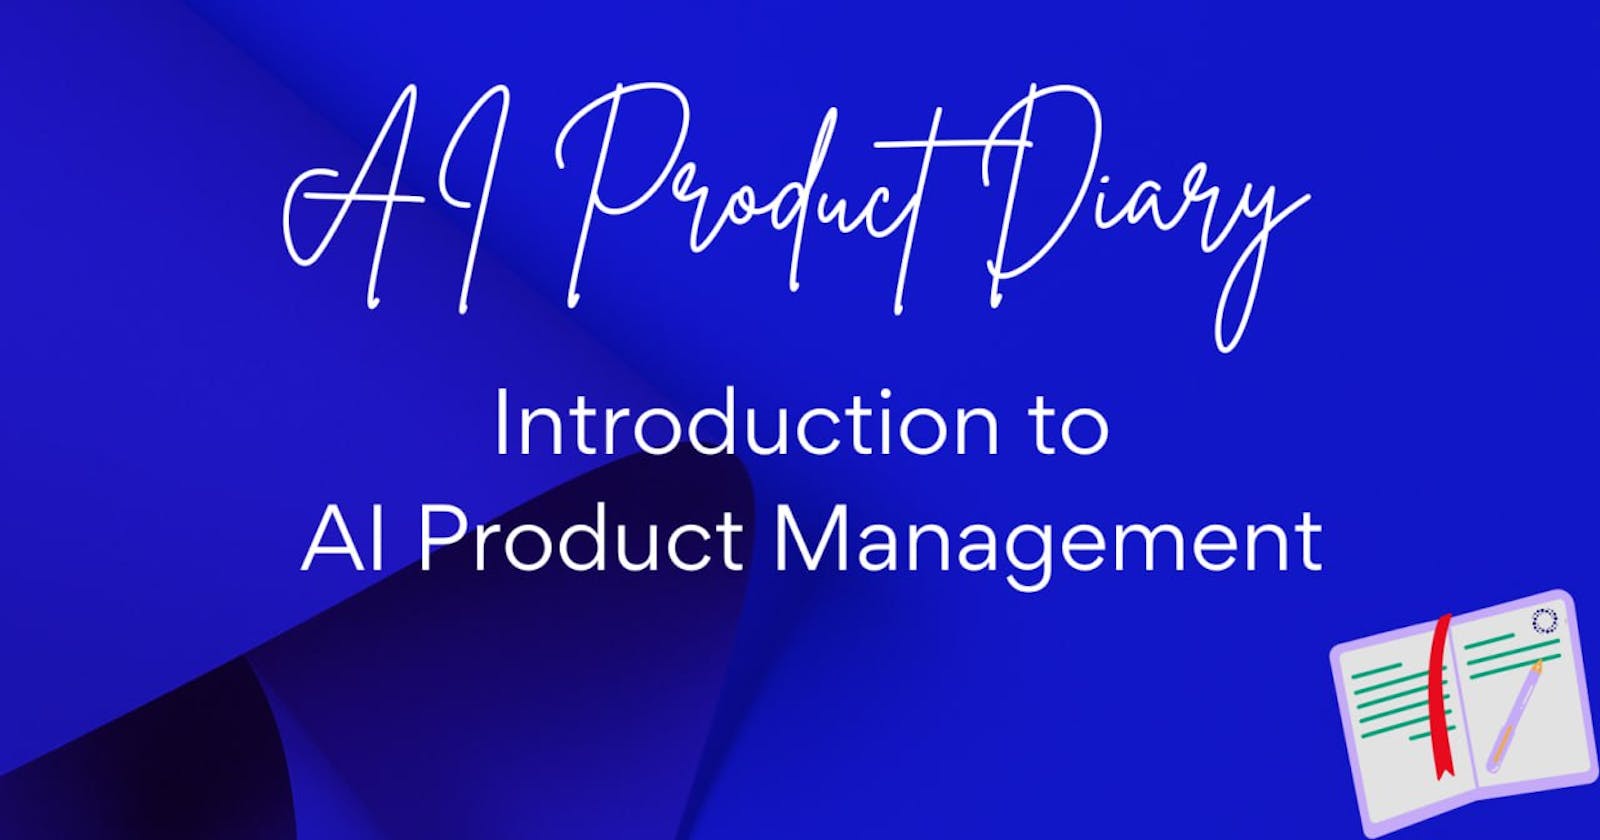 Introduction to AI Product Management — what is it? why is it important?